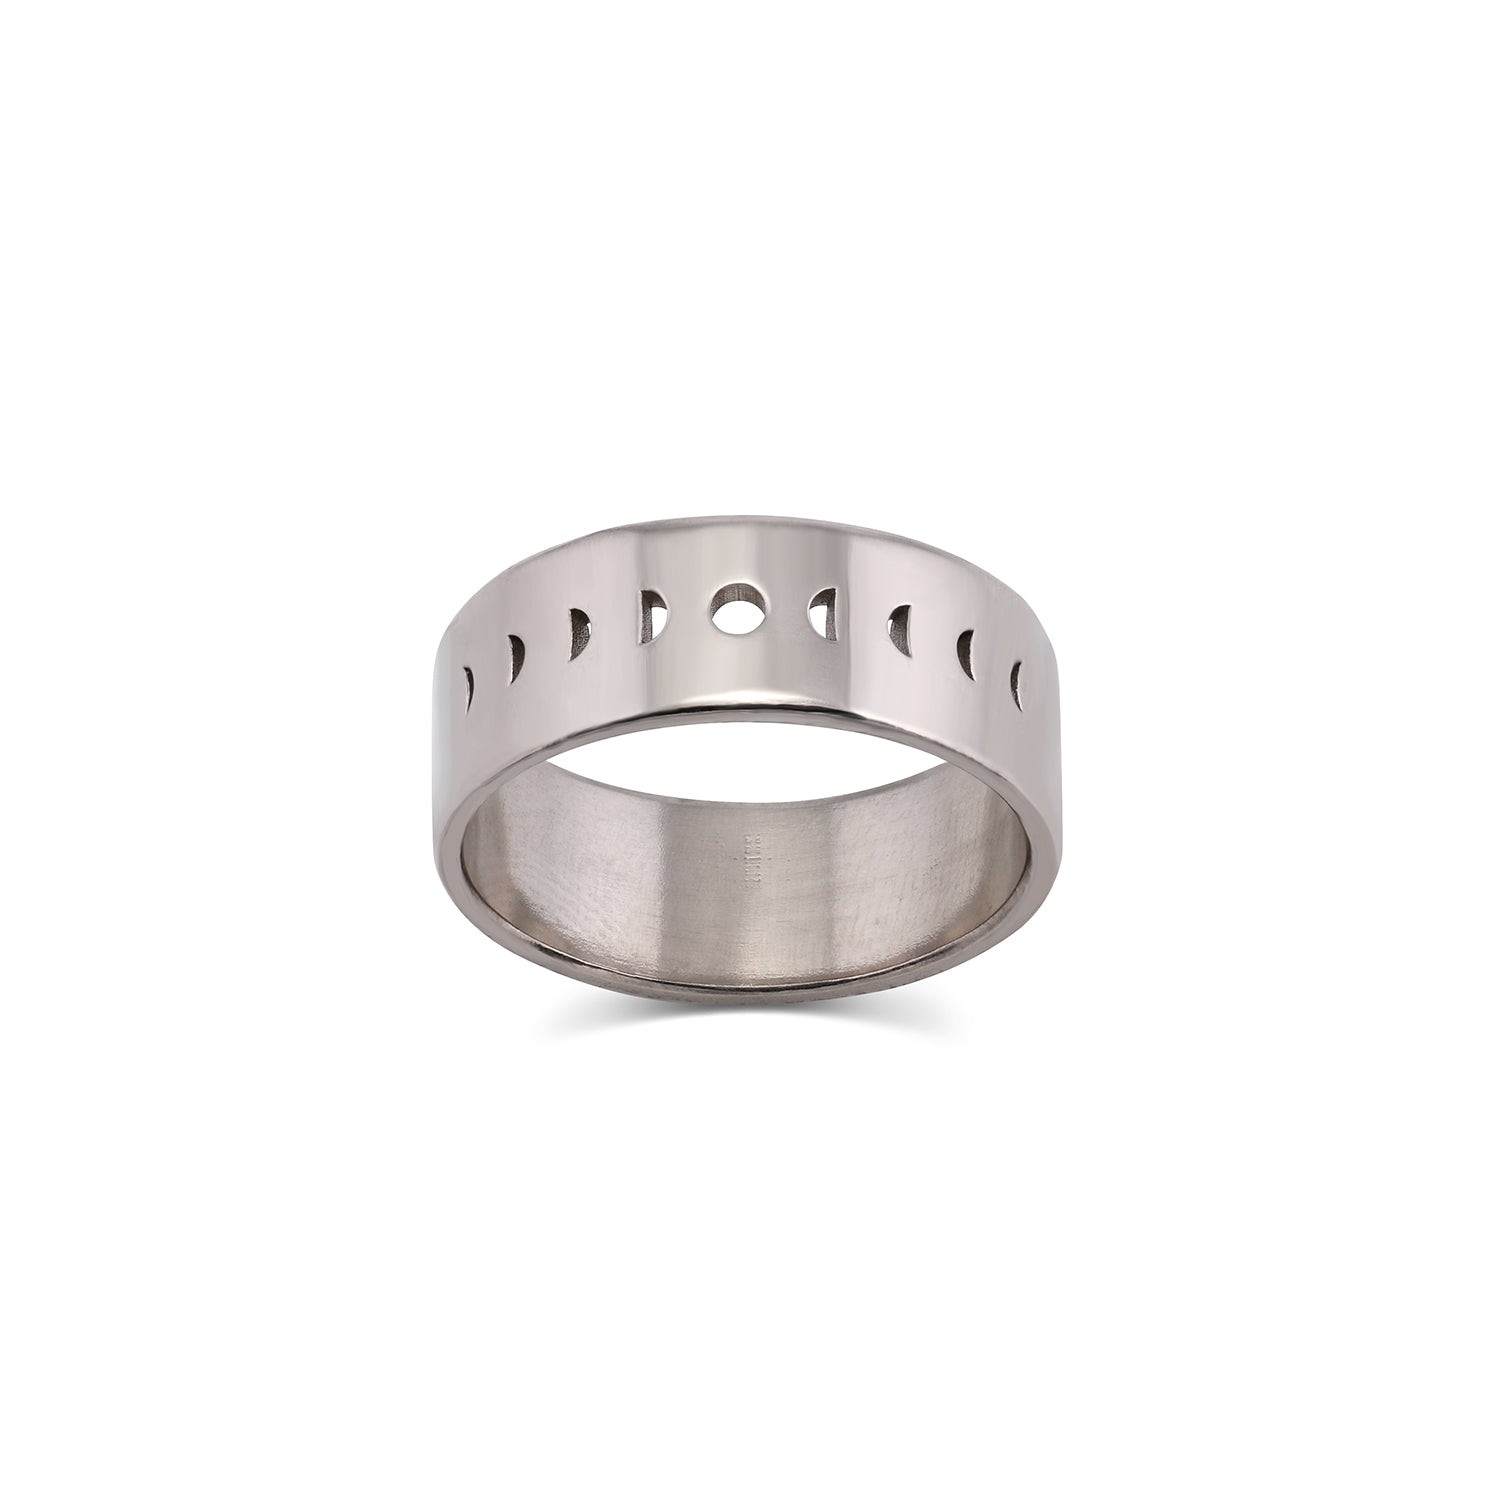 Moon Phase Rings moon phase rings > stacking rings > wedding bands > gender neutral bands > rose cut diamond ring > promise rings >lunar phase ring > moon ring > phases of the moon ring platinum / 6 Eclipse Moon phase ring | gender neutral wide band